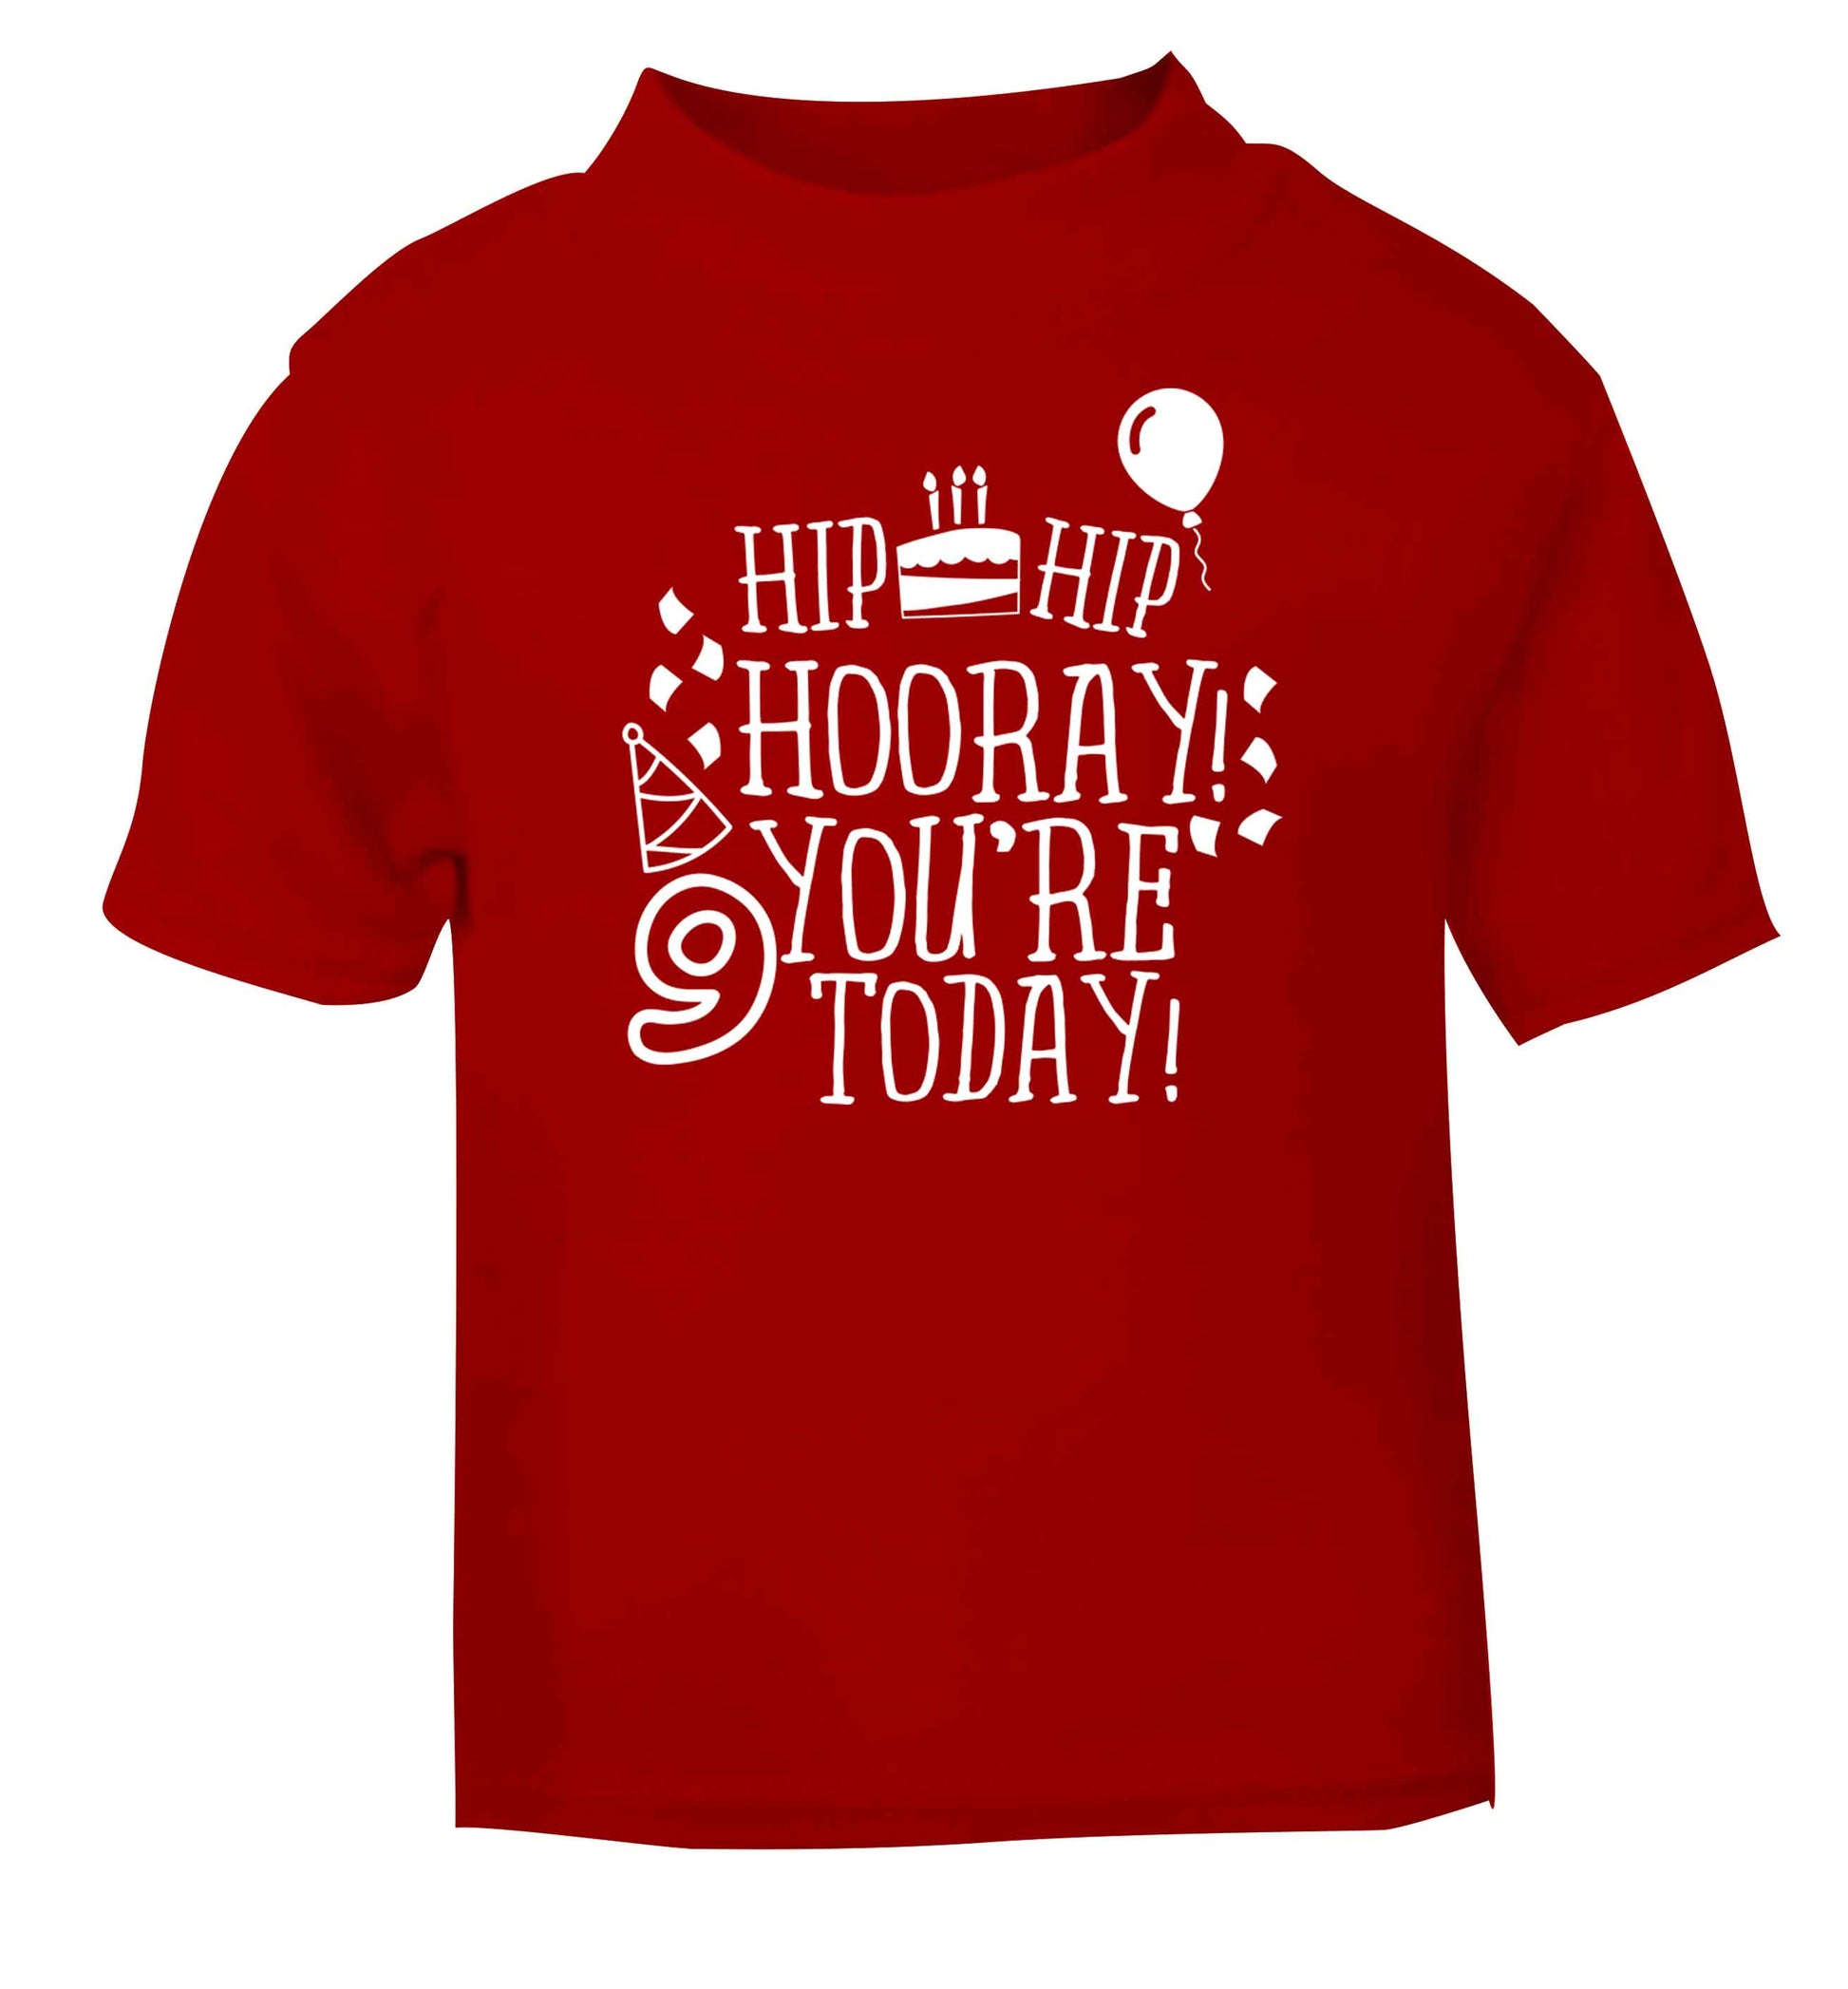 Hip hip hooray you're 9 today! red baby toddler Tshirt 2 Years